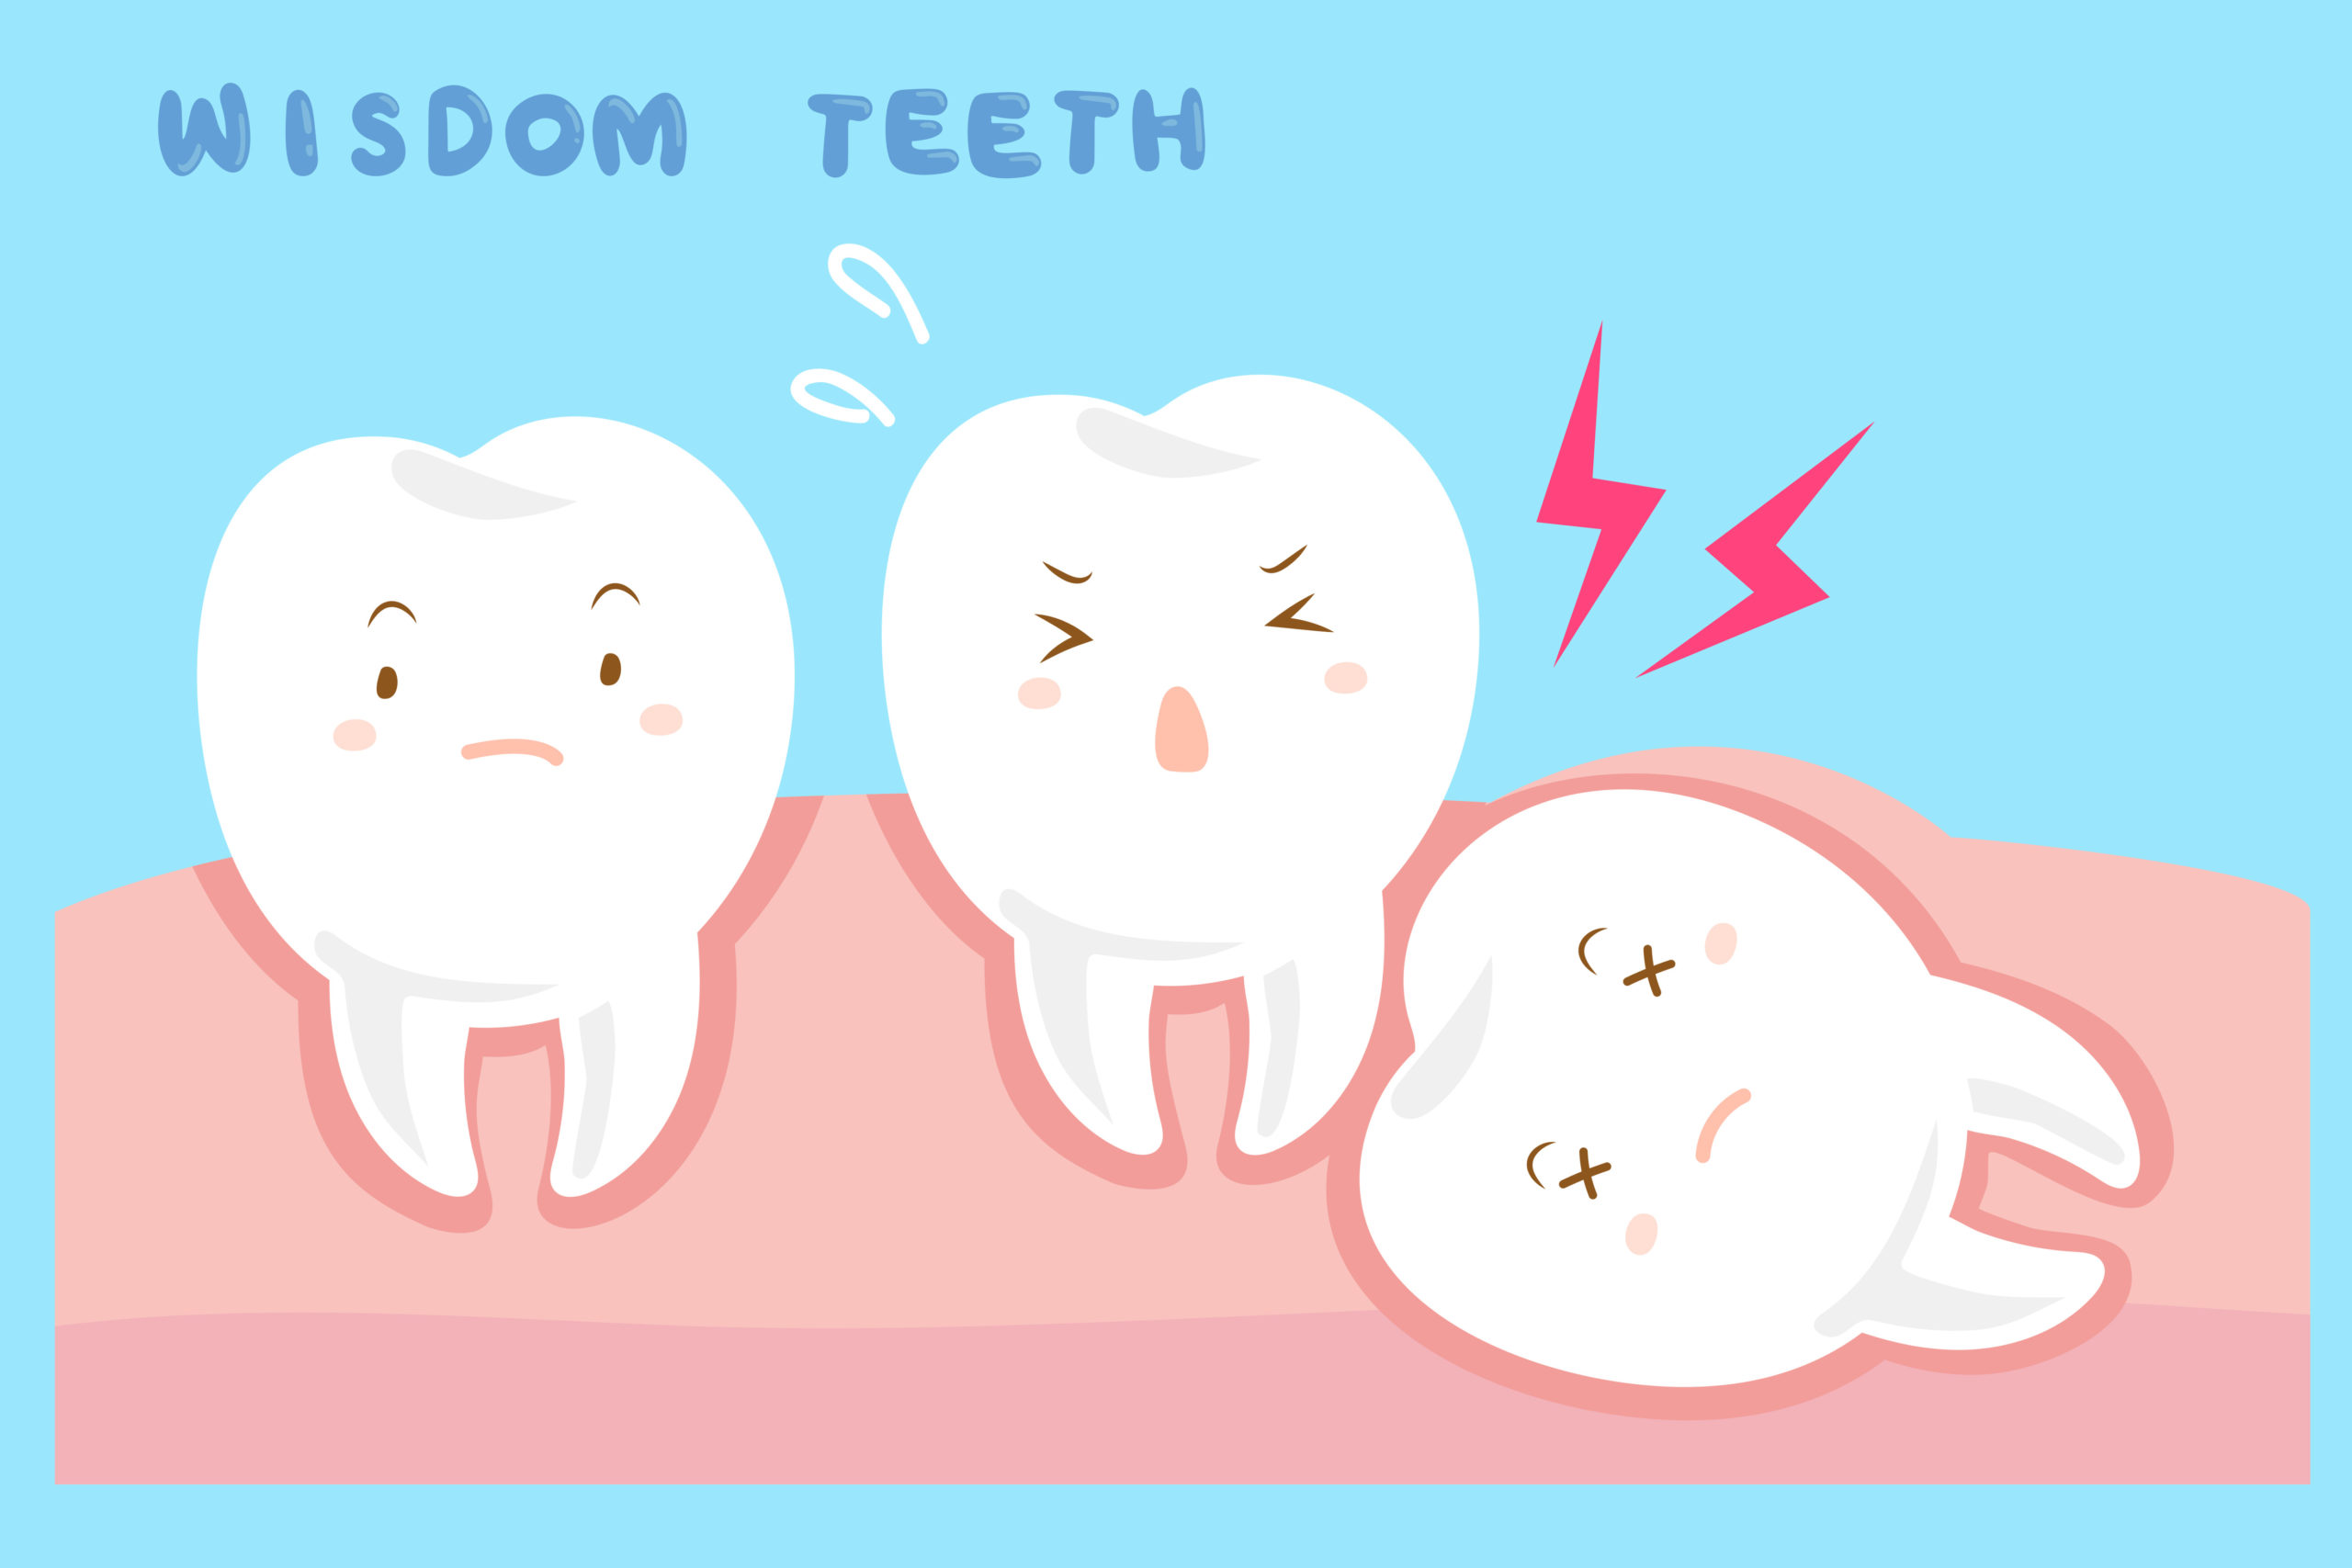 A cartoon of three teeth with different expressions.